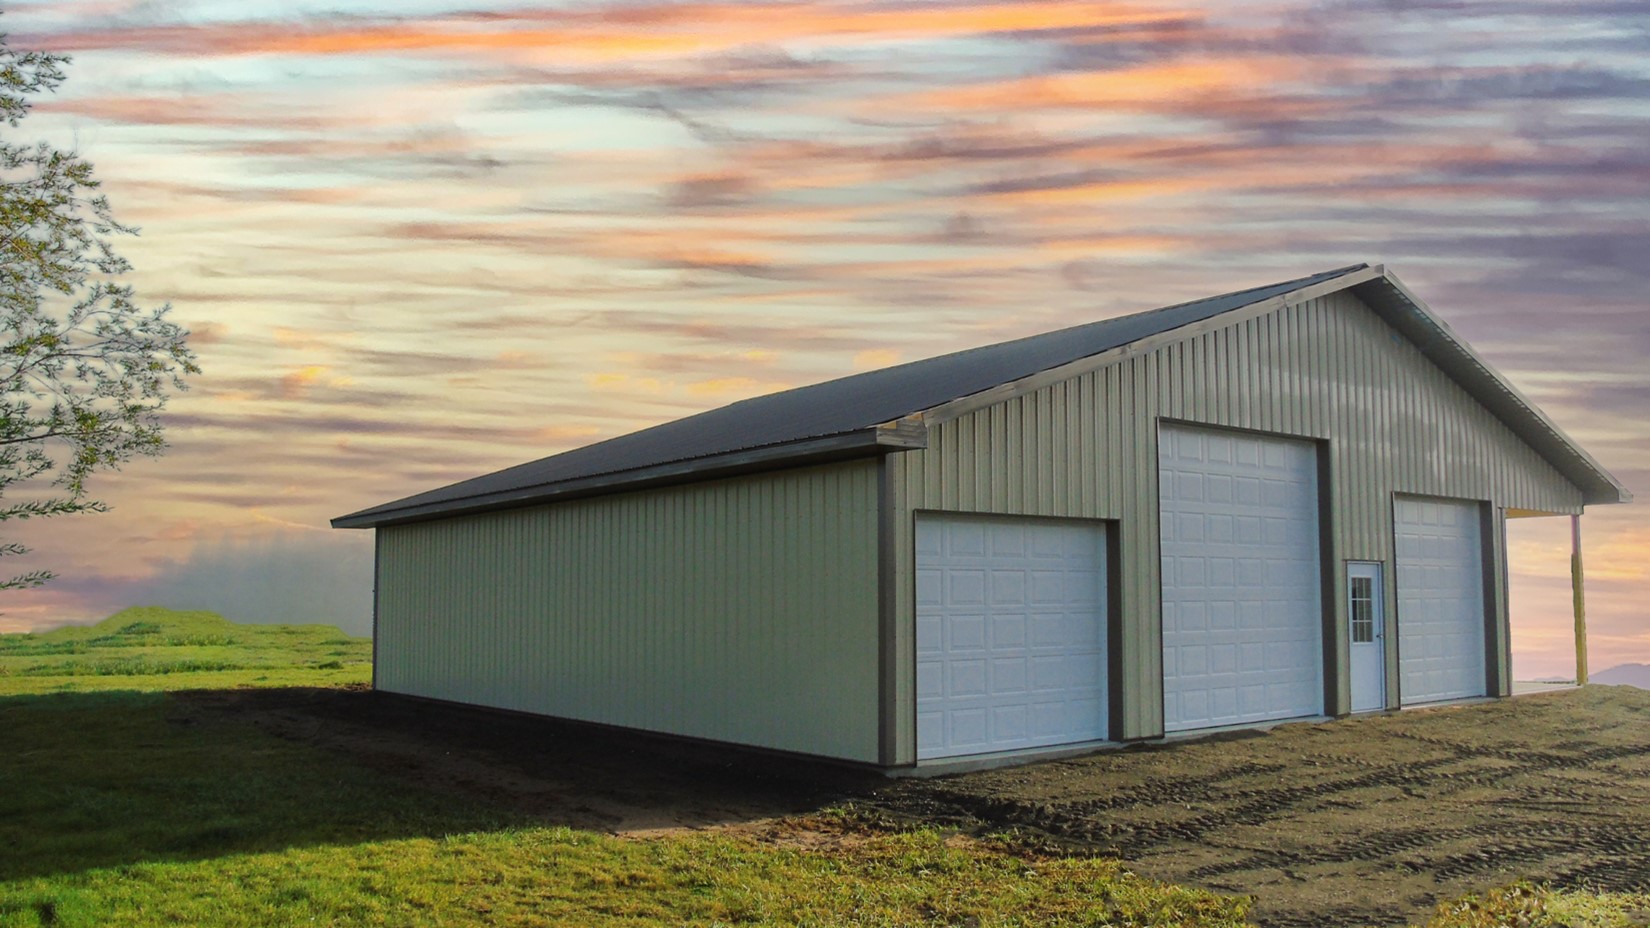 7 Materials and Supplies You May Need When Building a Post Frame Garage in Cody, Wyoming